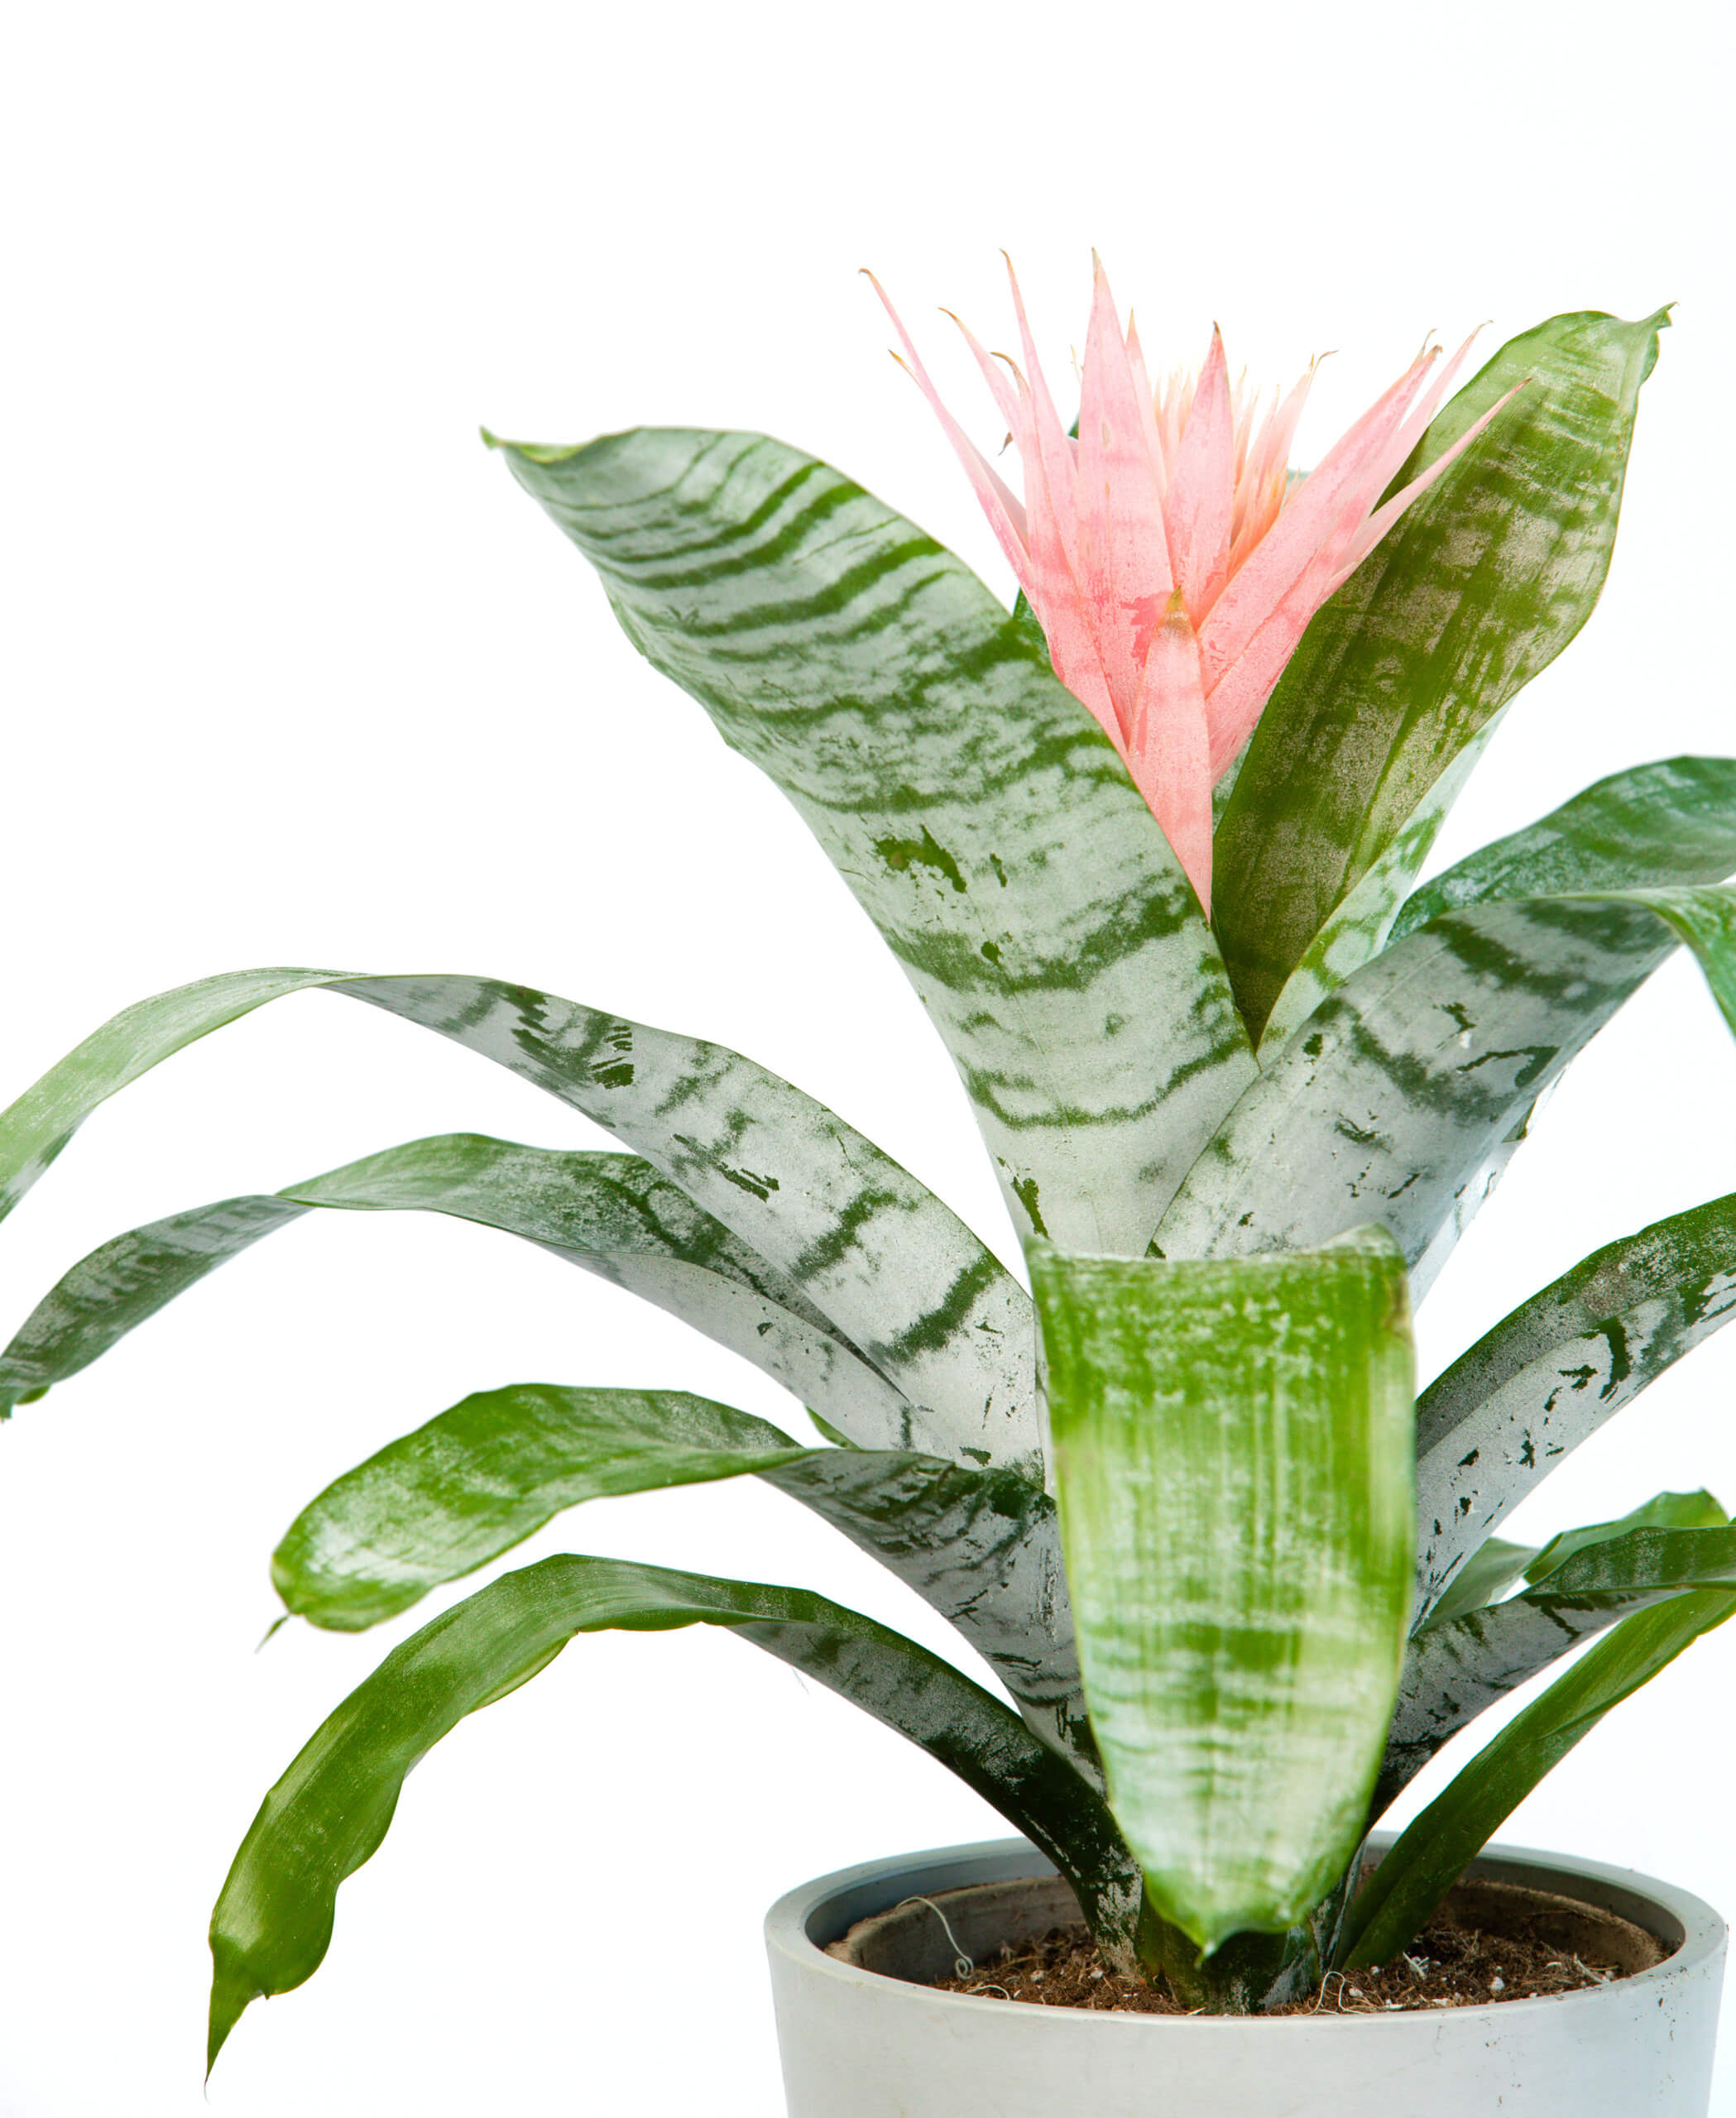 Why are the leaves on my Bromeliad brown, dry, and crispy? - Bloomscape